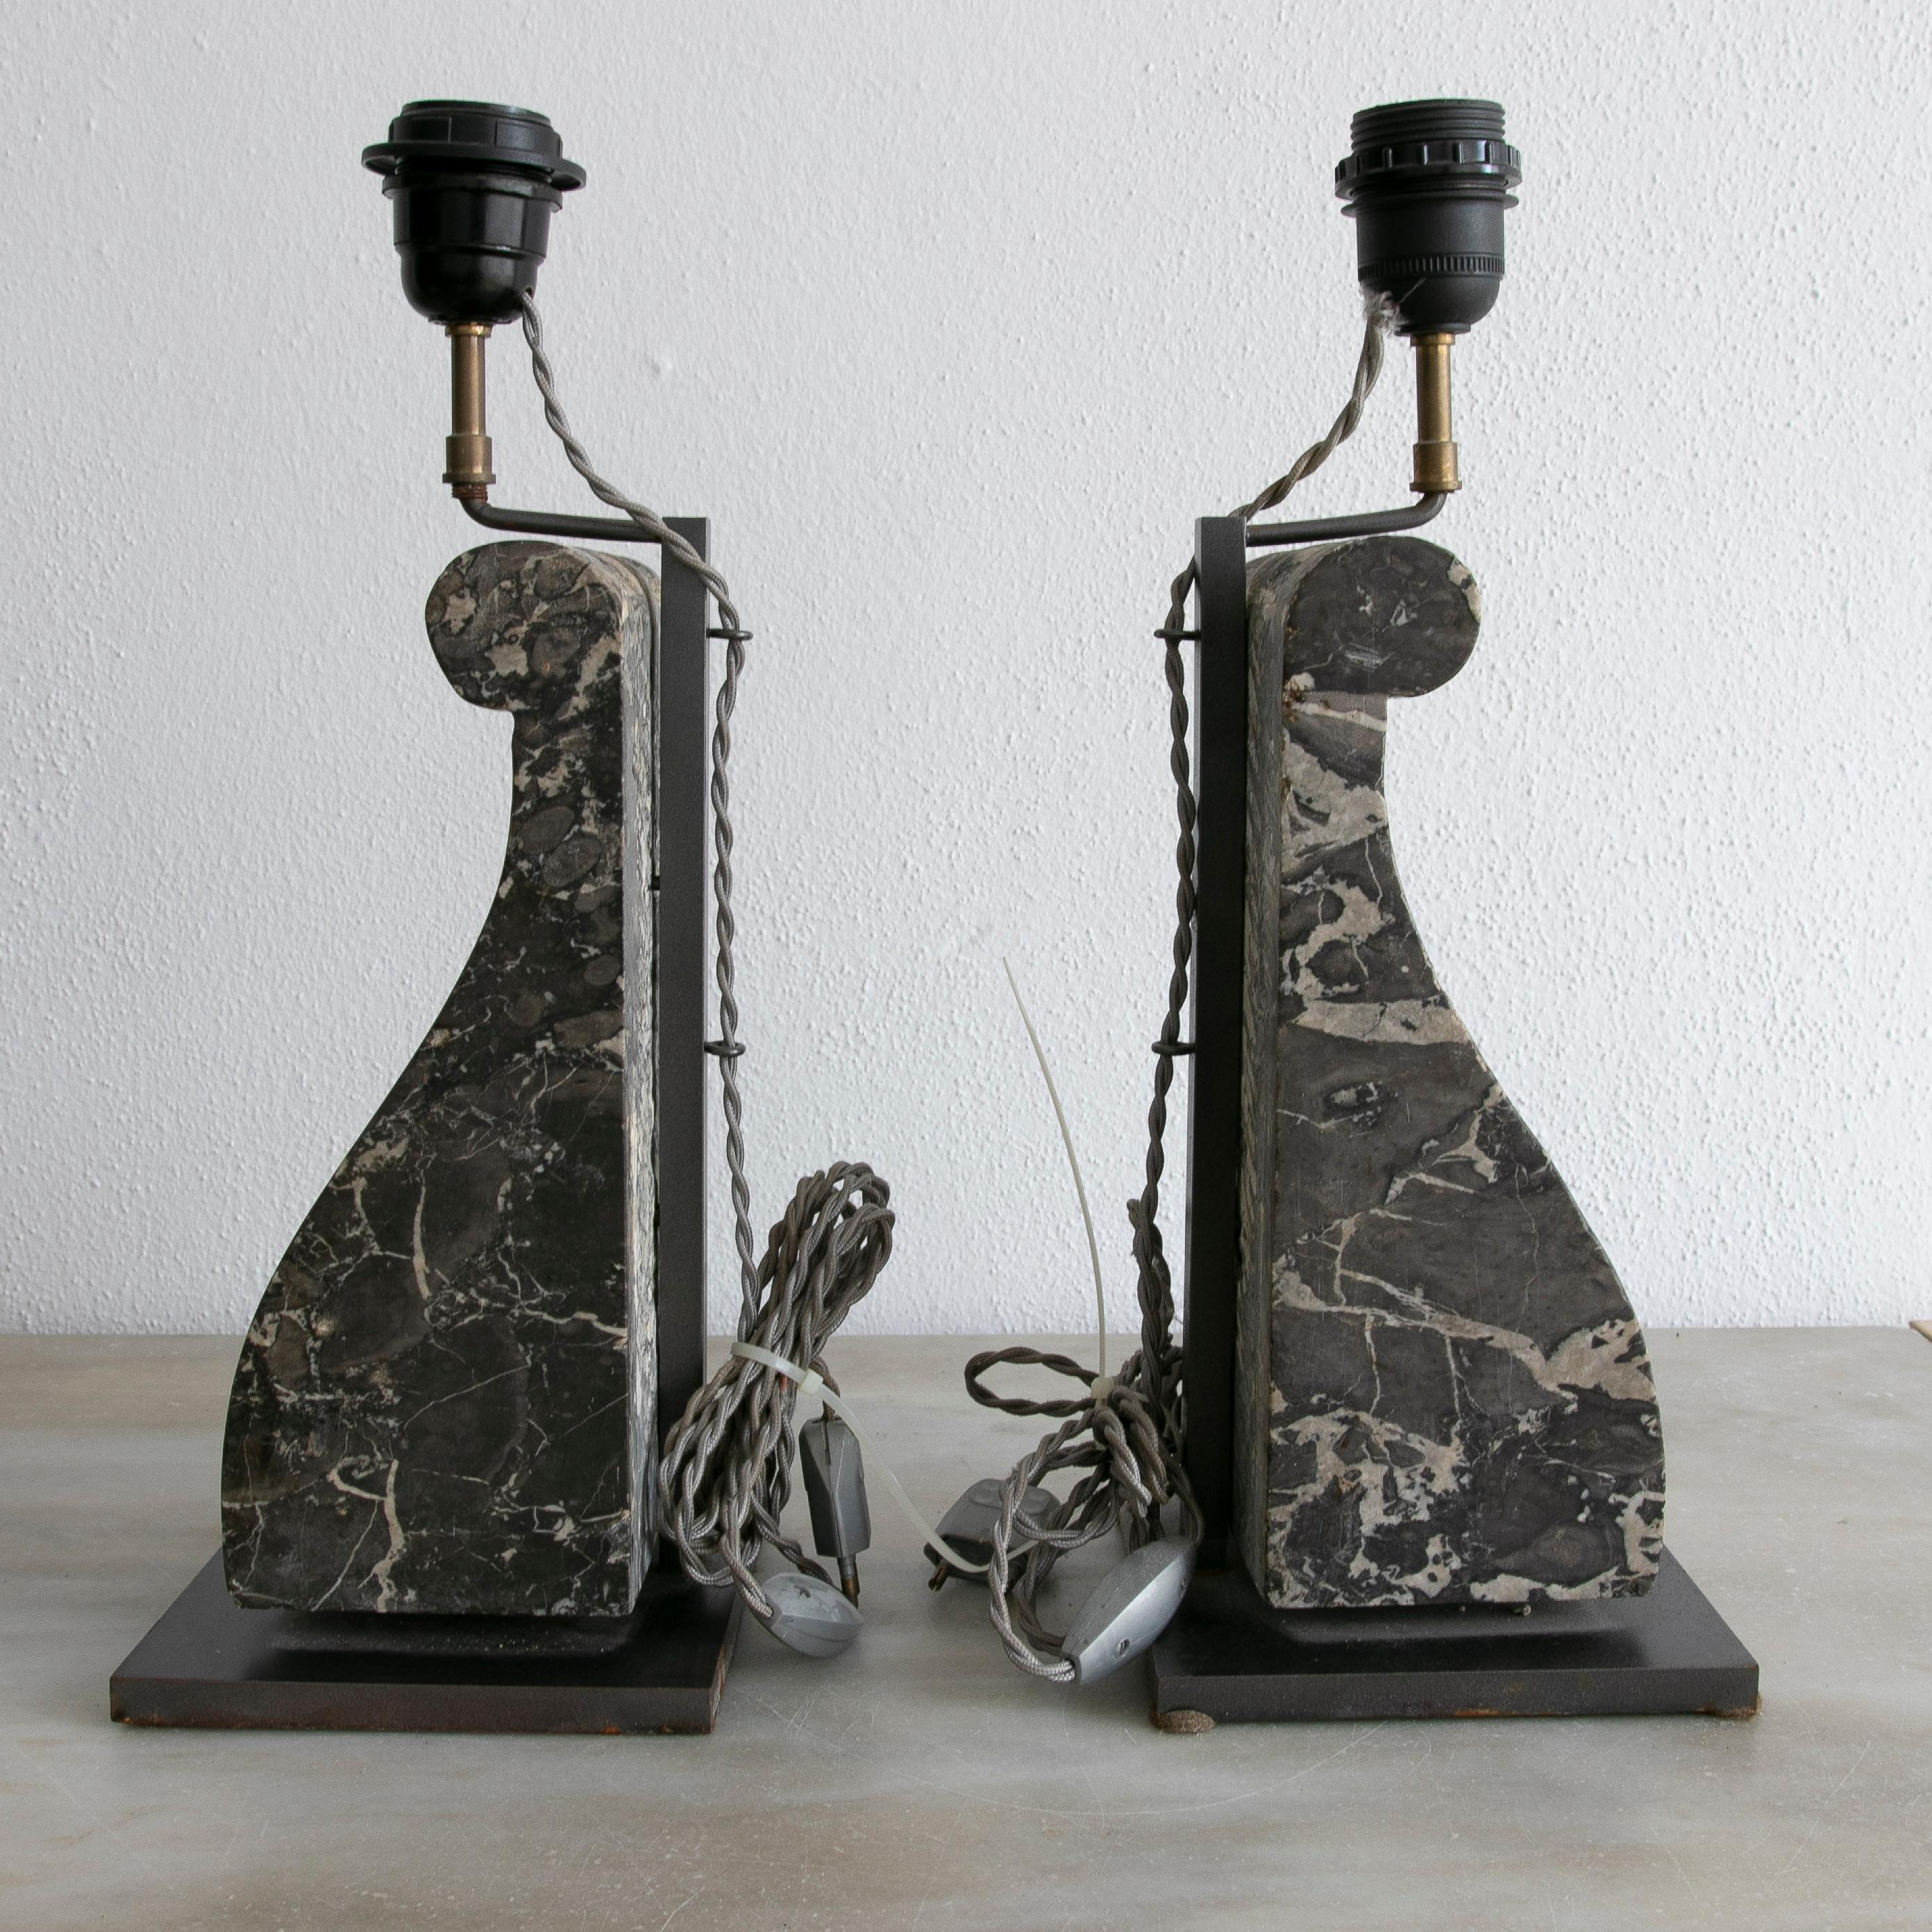 Hand-Carved Pair of 19th Century Nero Portoro Black Marble Corbels Turned into Table Lamps  For Sale